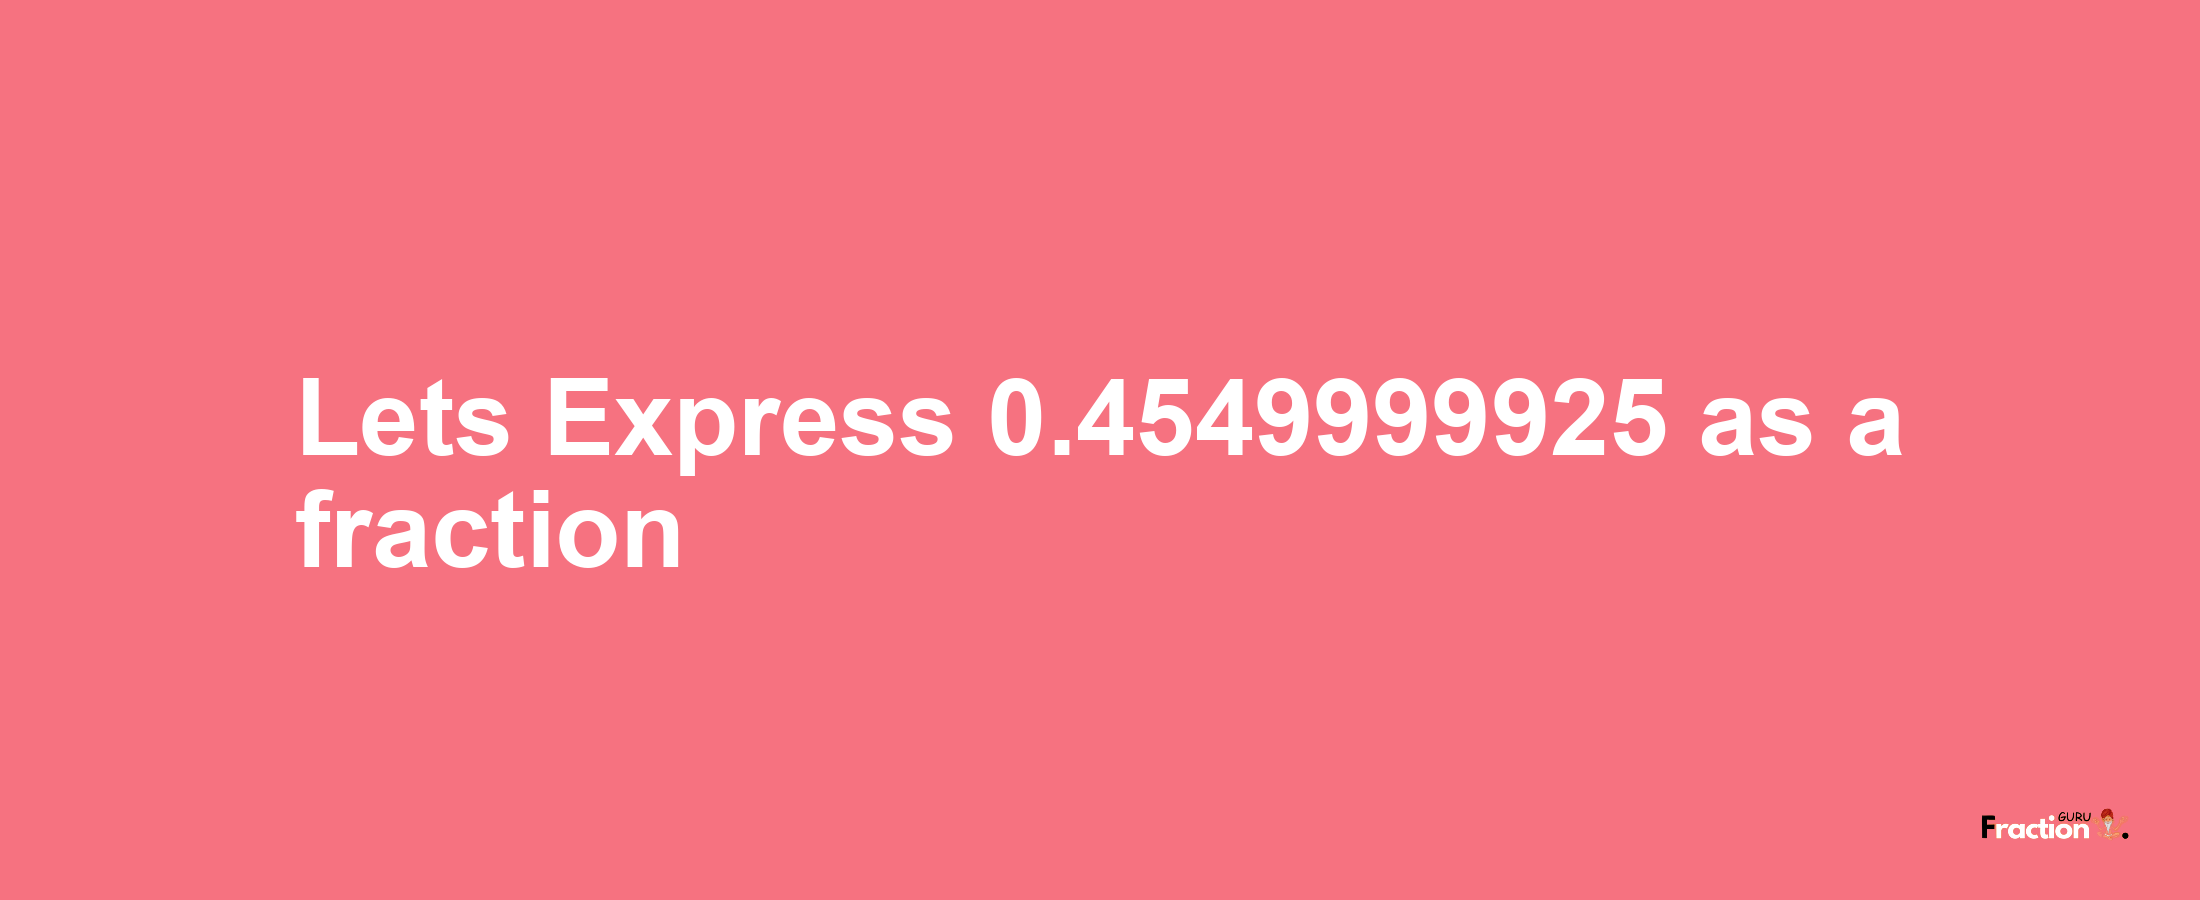 Lets Express 0.4549999925 as afraction